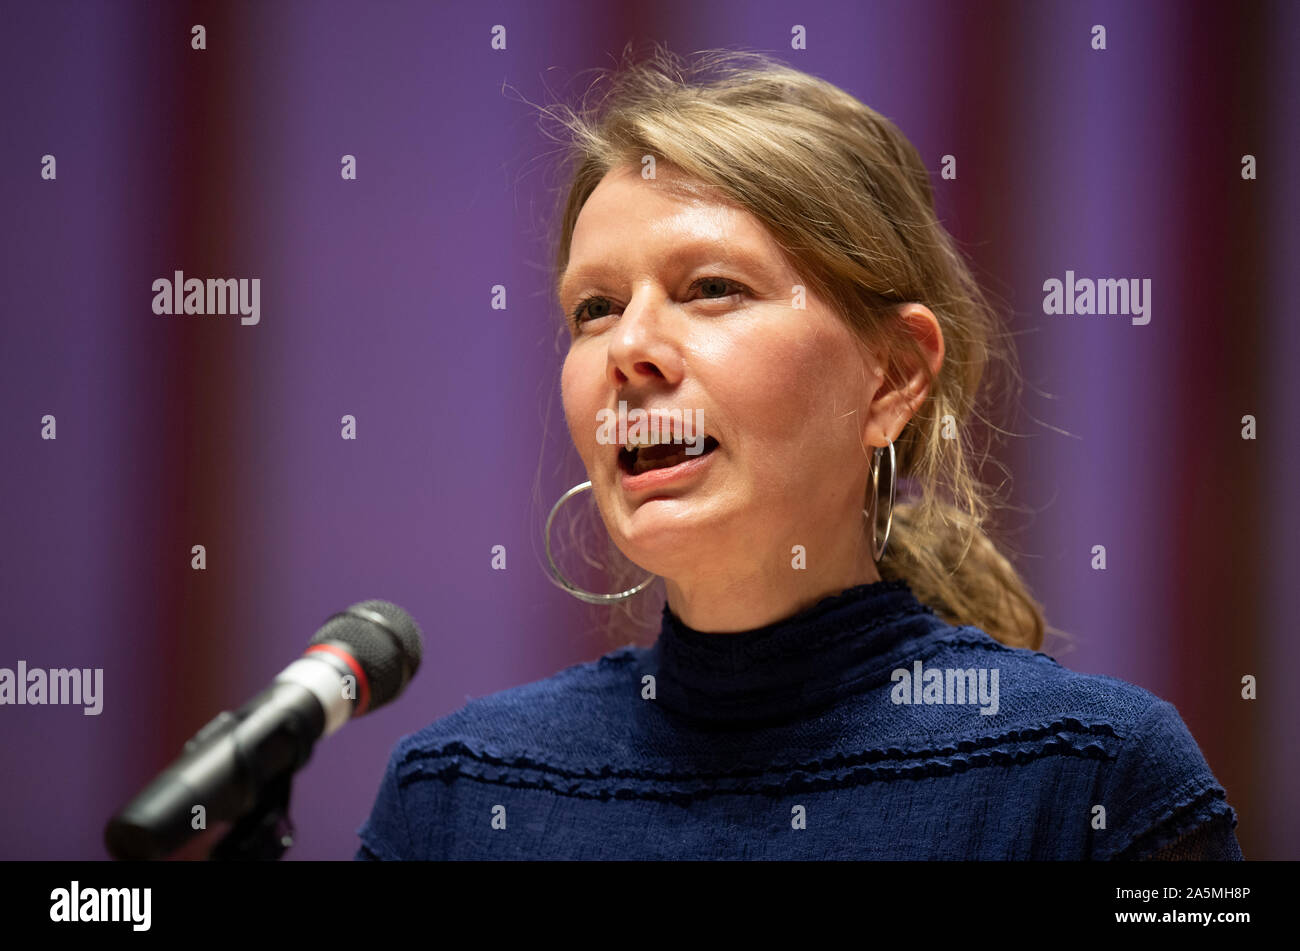 Manchester, UK. 21st October 2019. Canadian poet Karen Solie appears at Manchester Literature Festival. © Russell Hart/Alamy Live News. Stock Photo